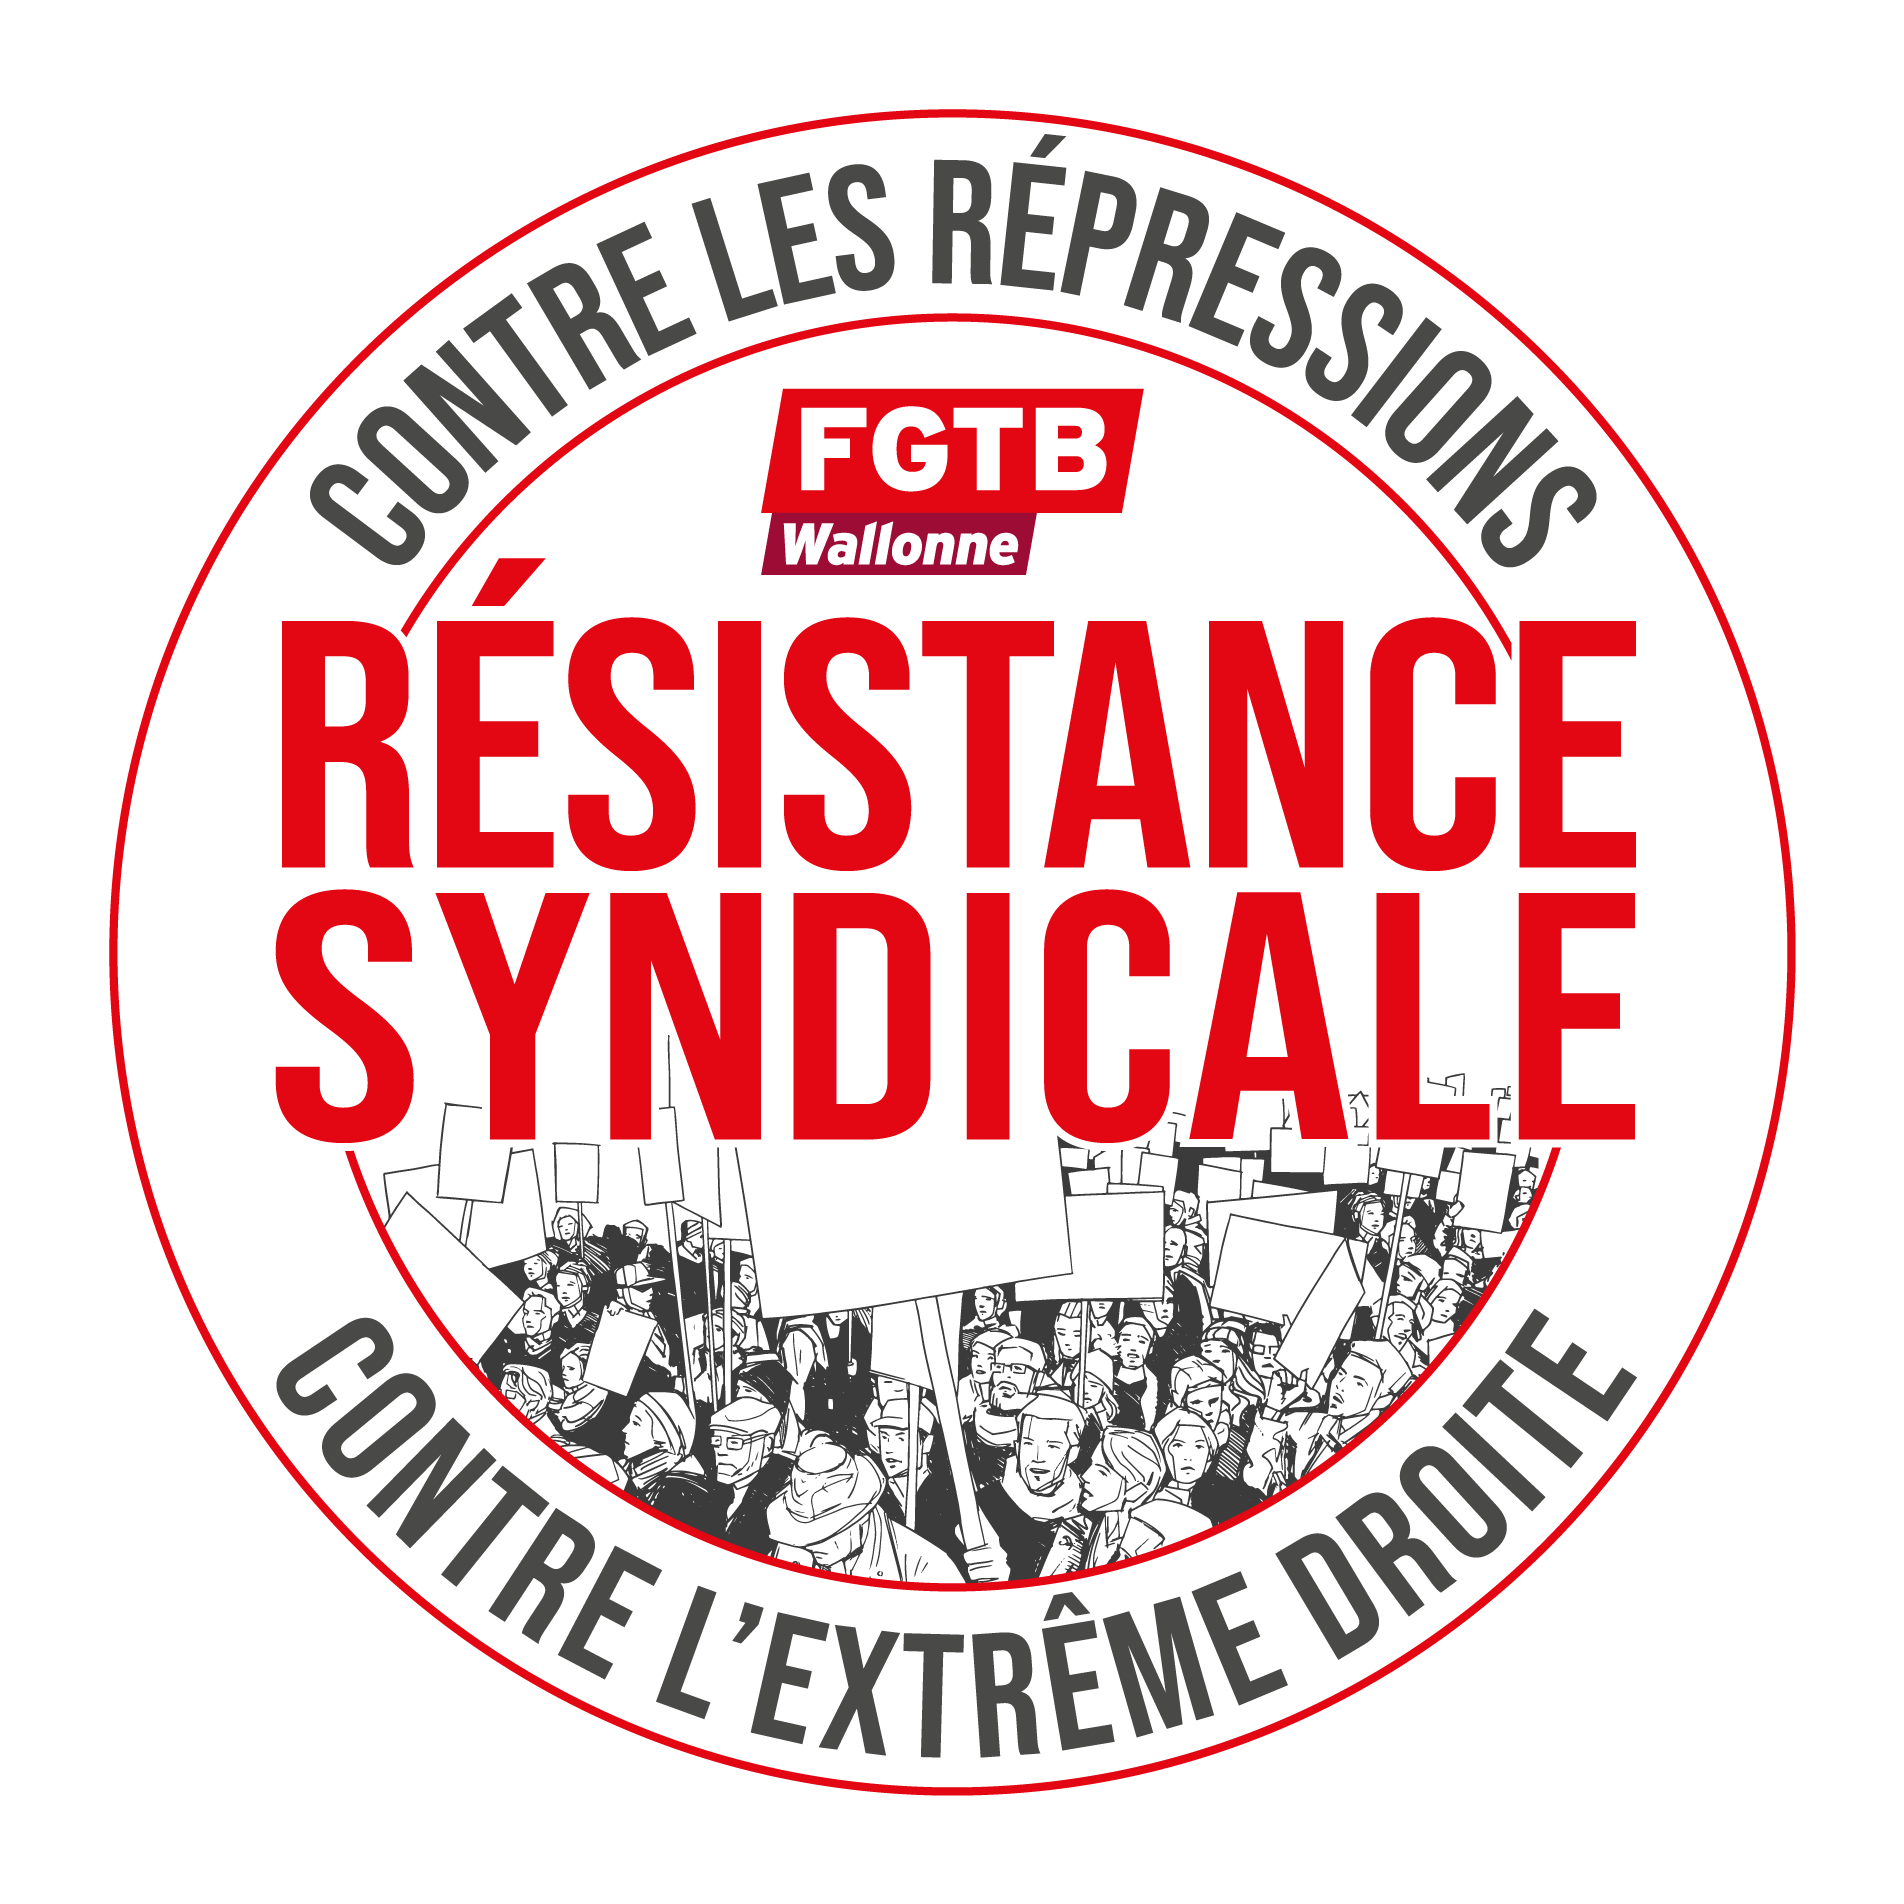 Image 2128_fgtb_wall_resistance_syndicale_logo